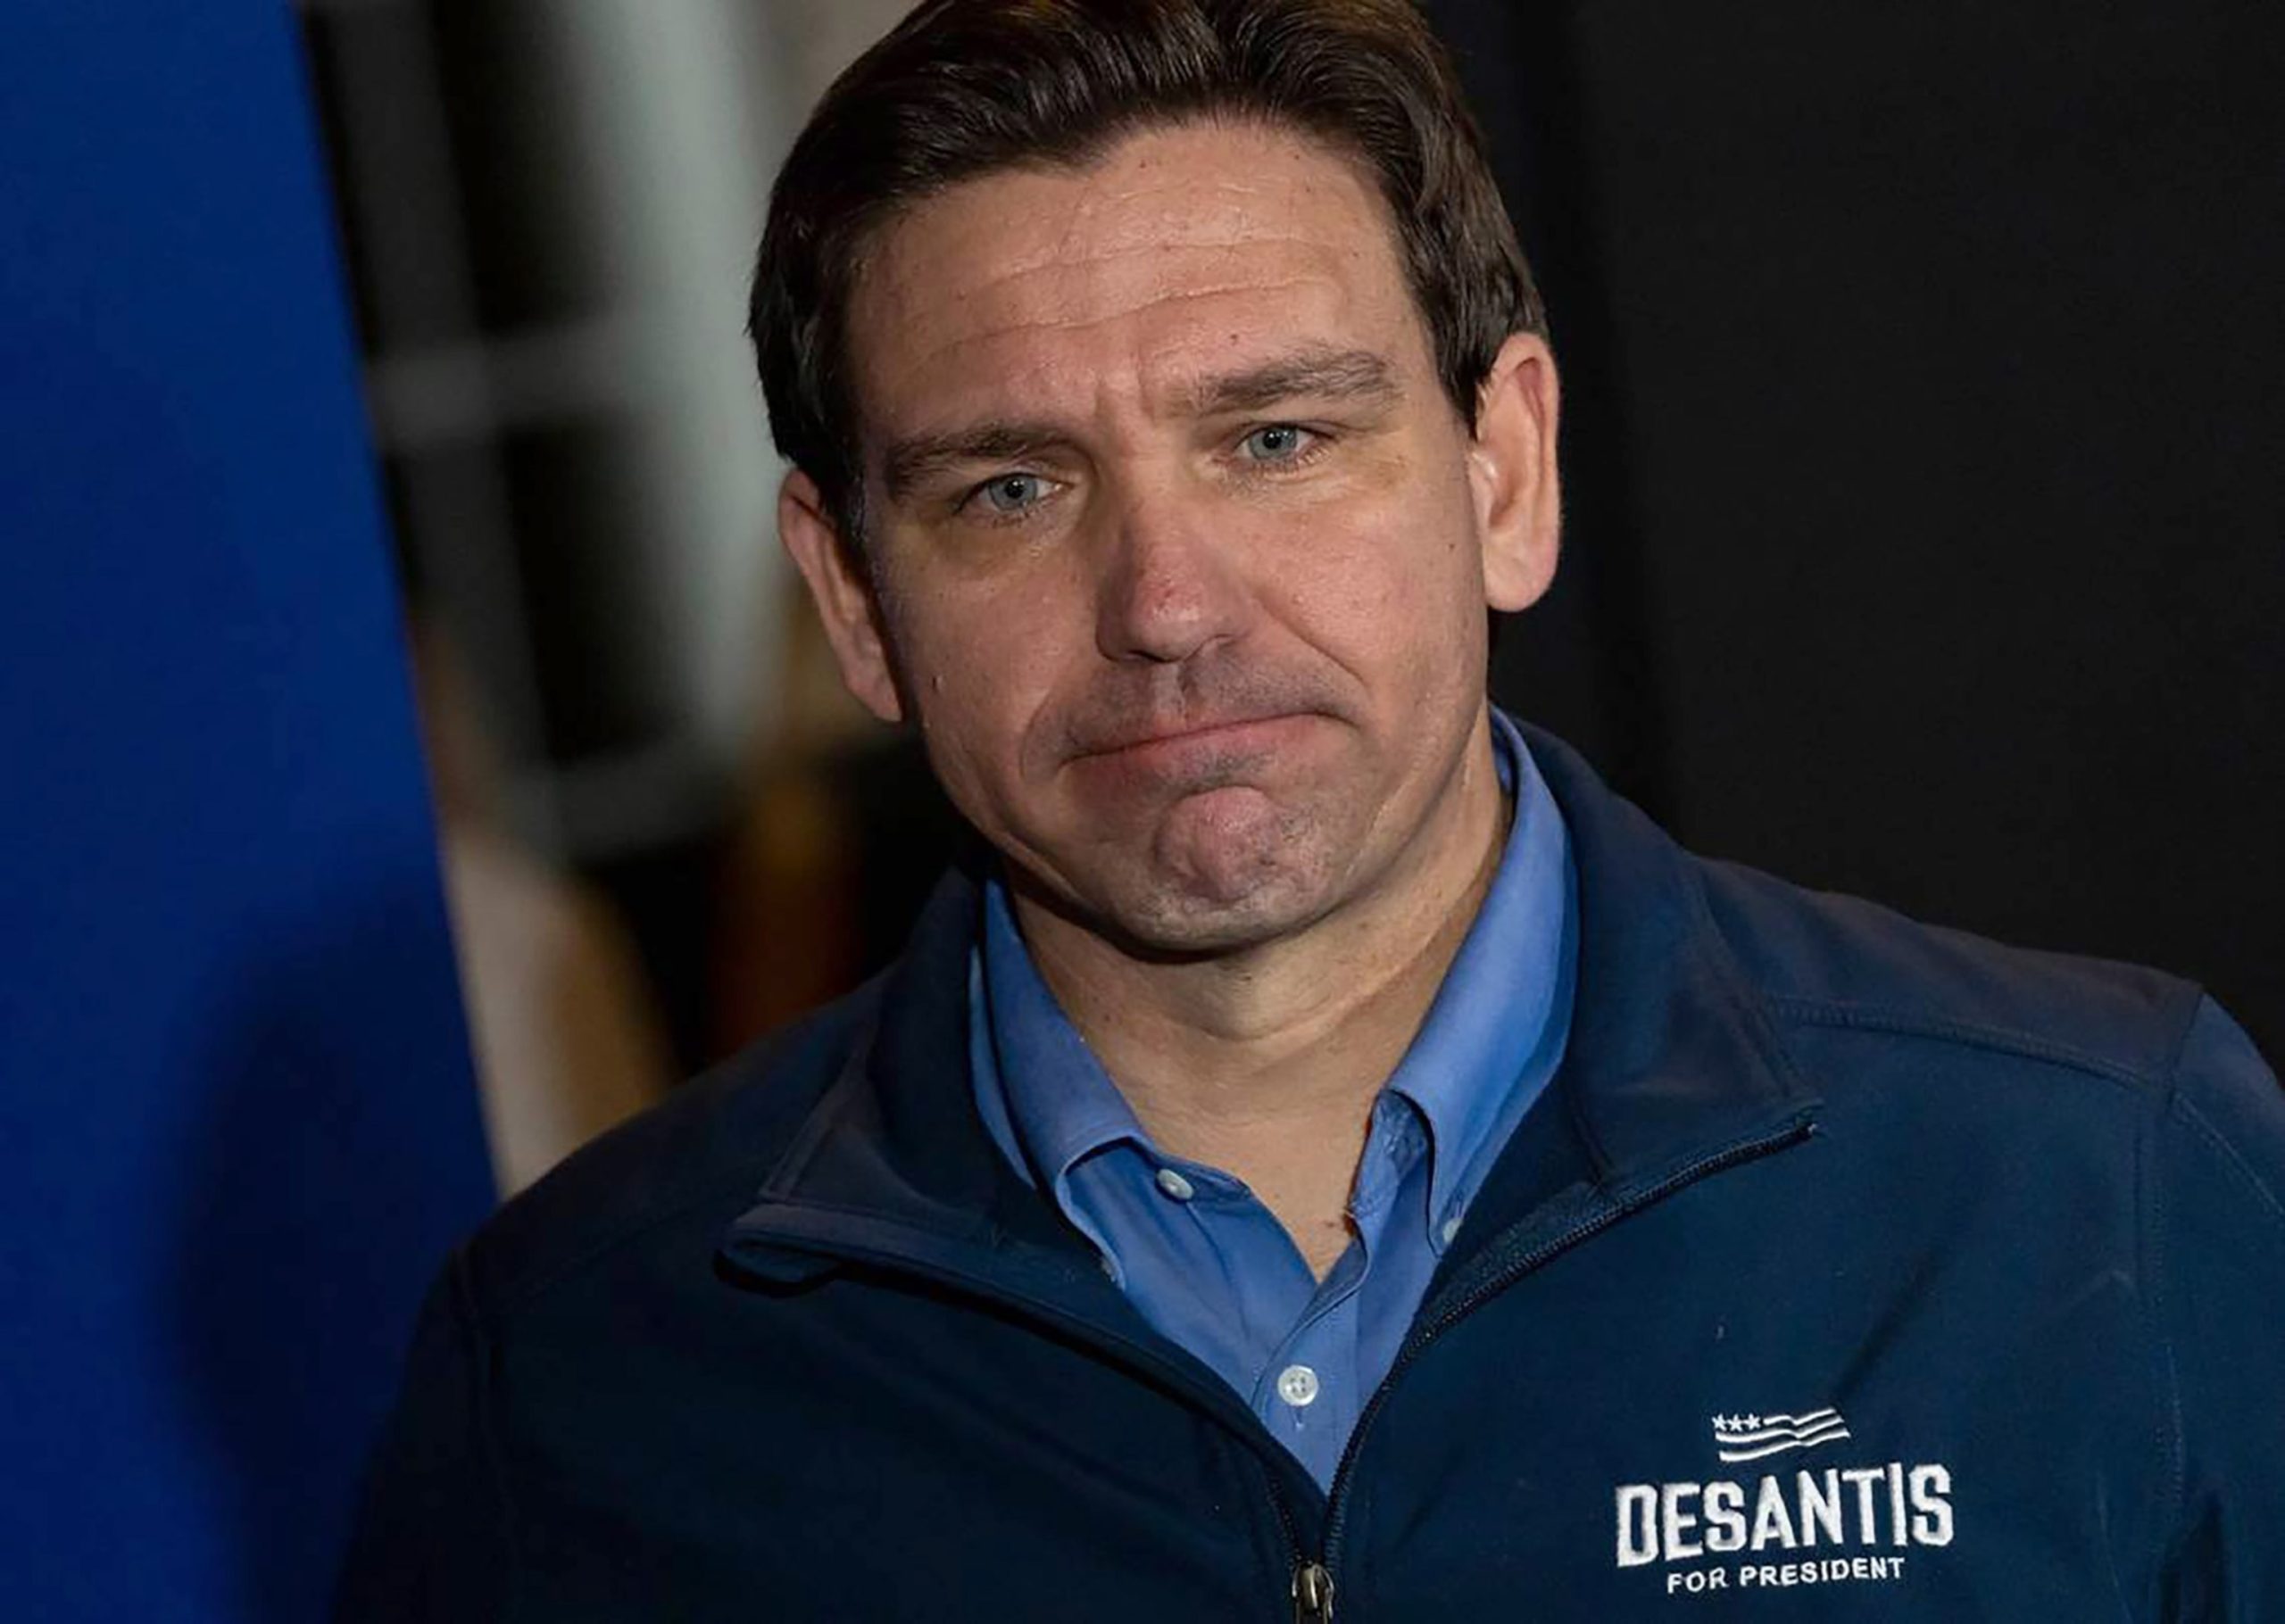 Florida's Top Law Enforcement Official Files Lawsuit Against DeSantis, Claiming Wrongful Termination for Whistleblowing